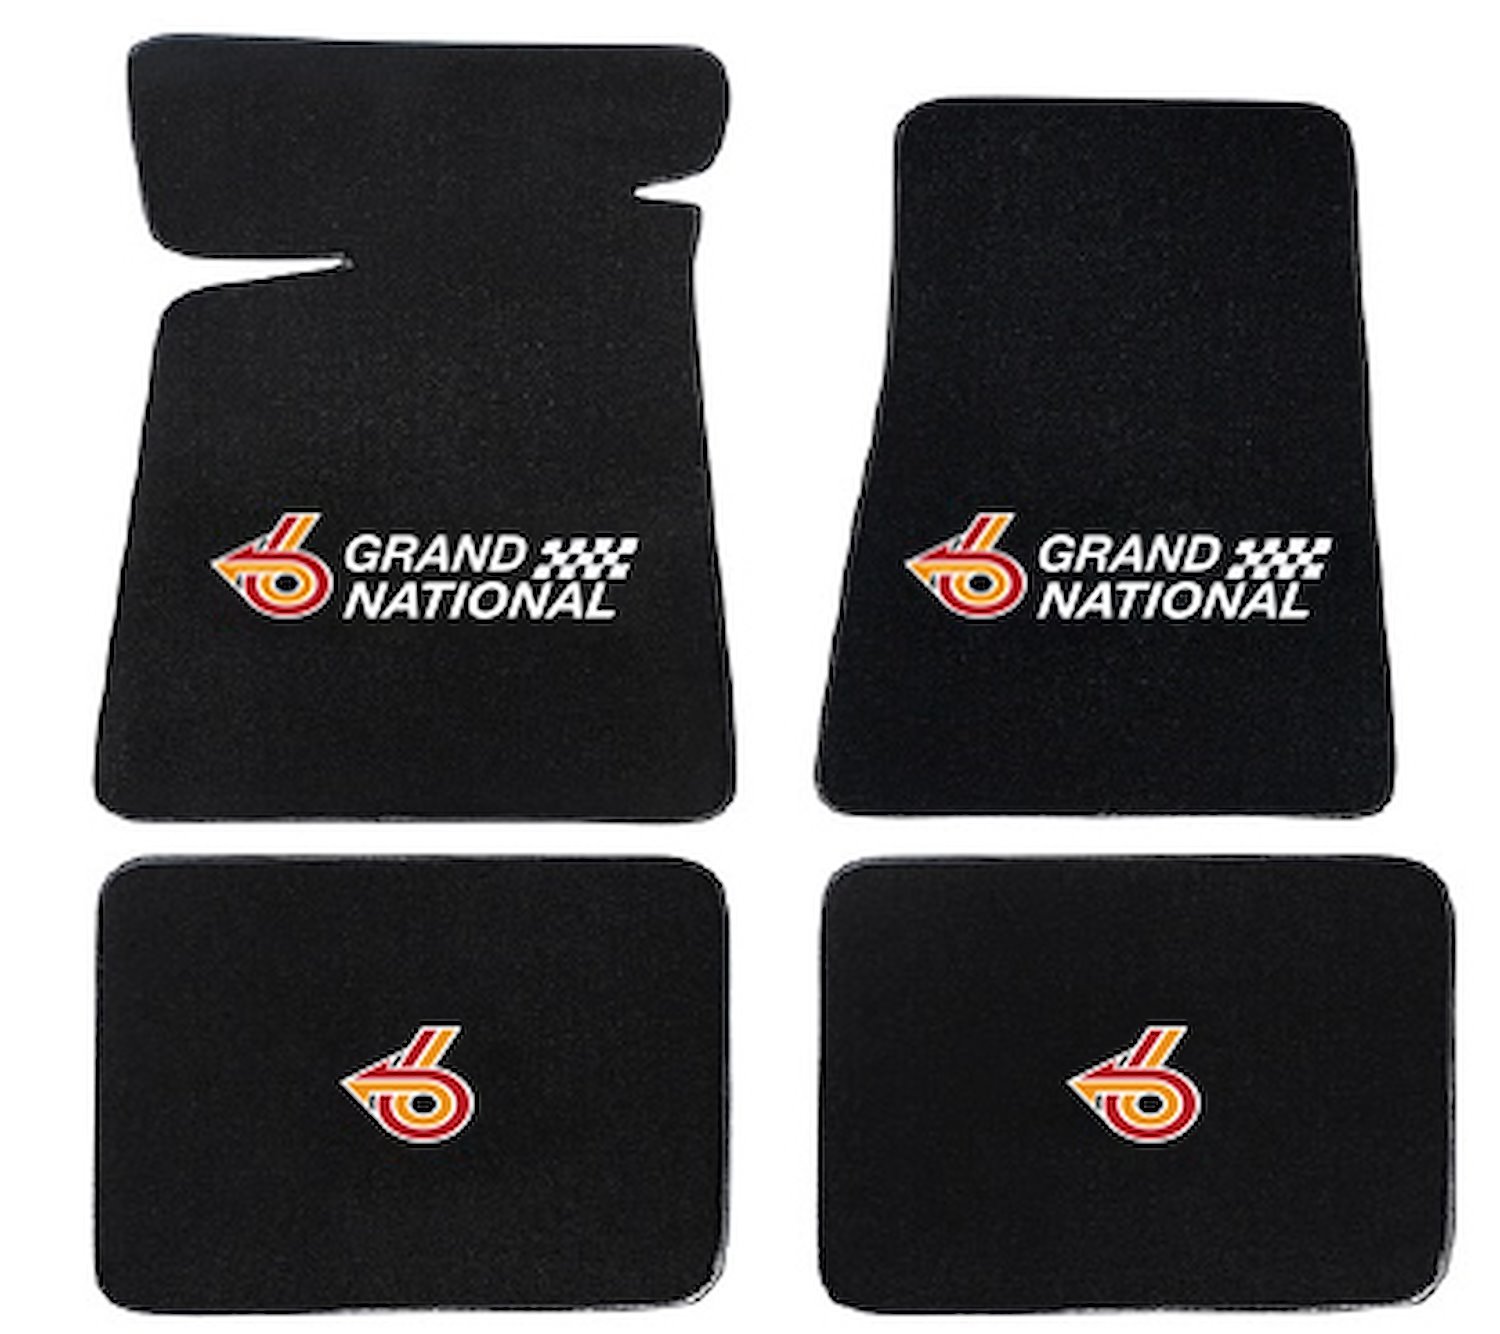 Molded Cut Pile Floor Mats for 1984-1987 Buick Regal Grand National [4-Piece, W/Grand National Logo, Black]